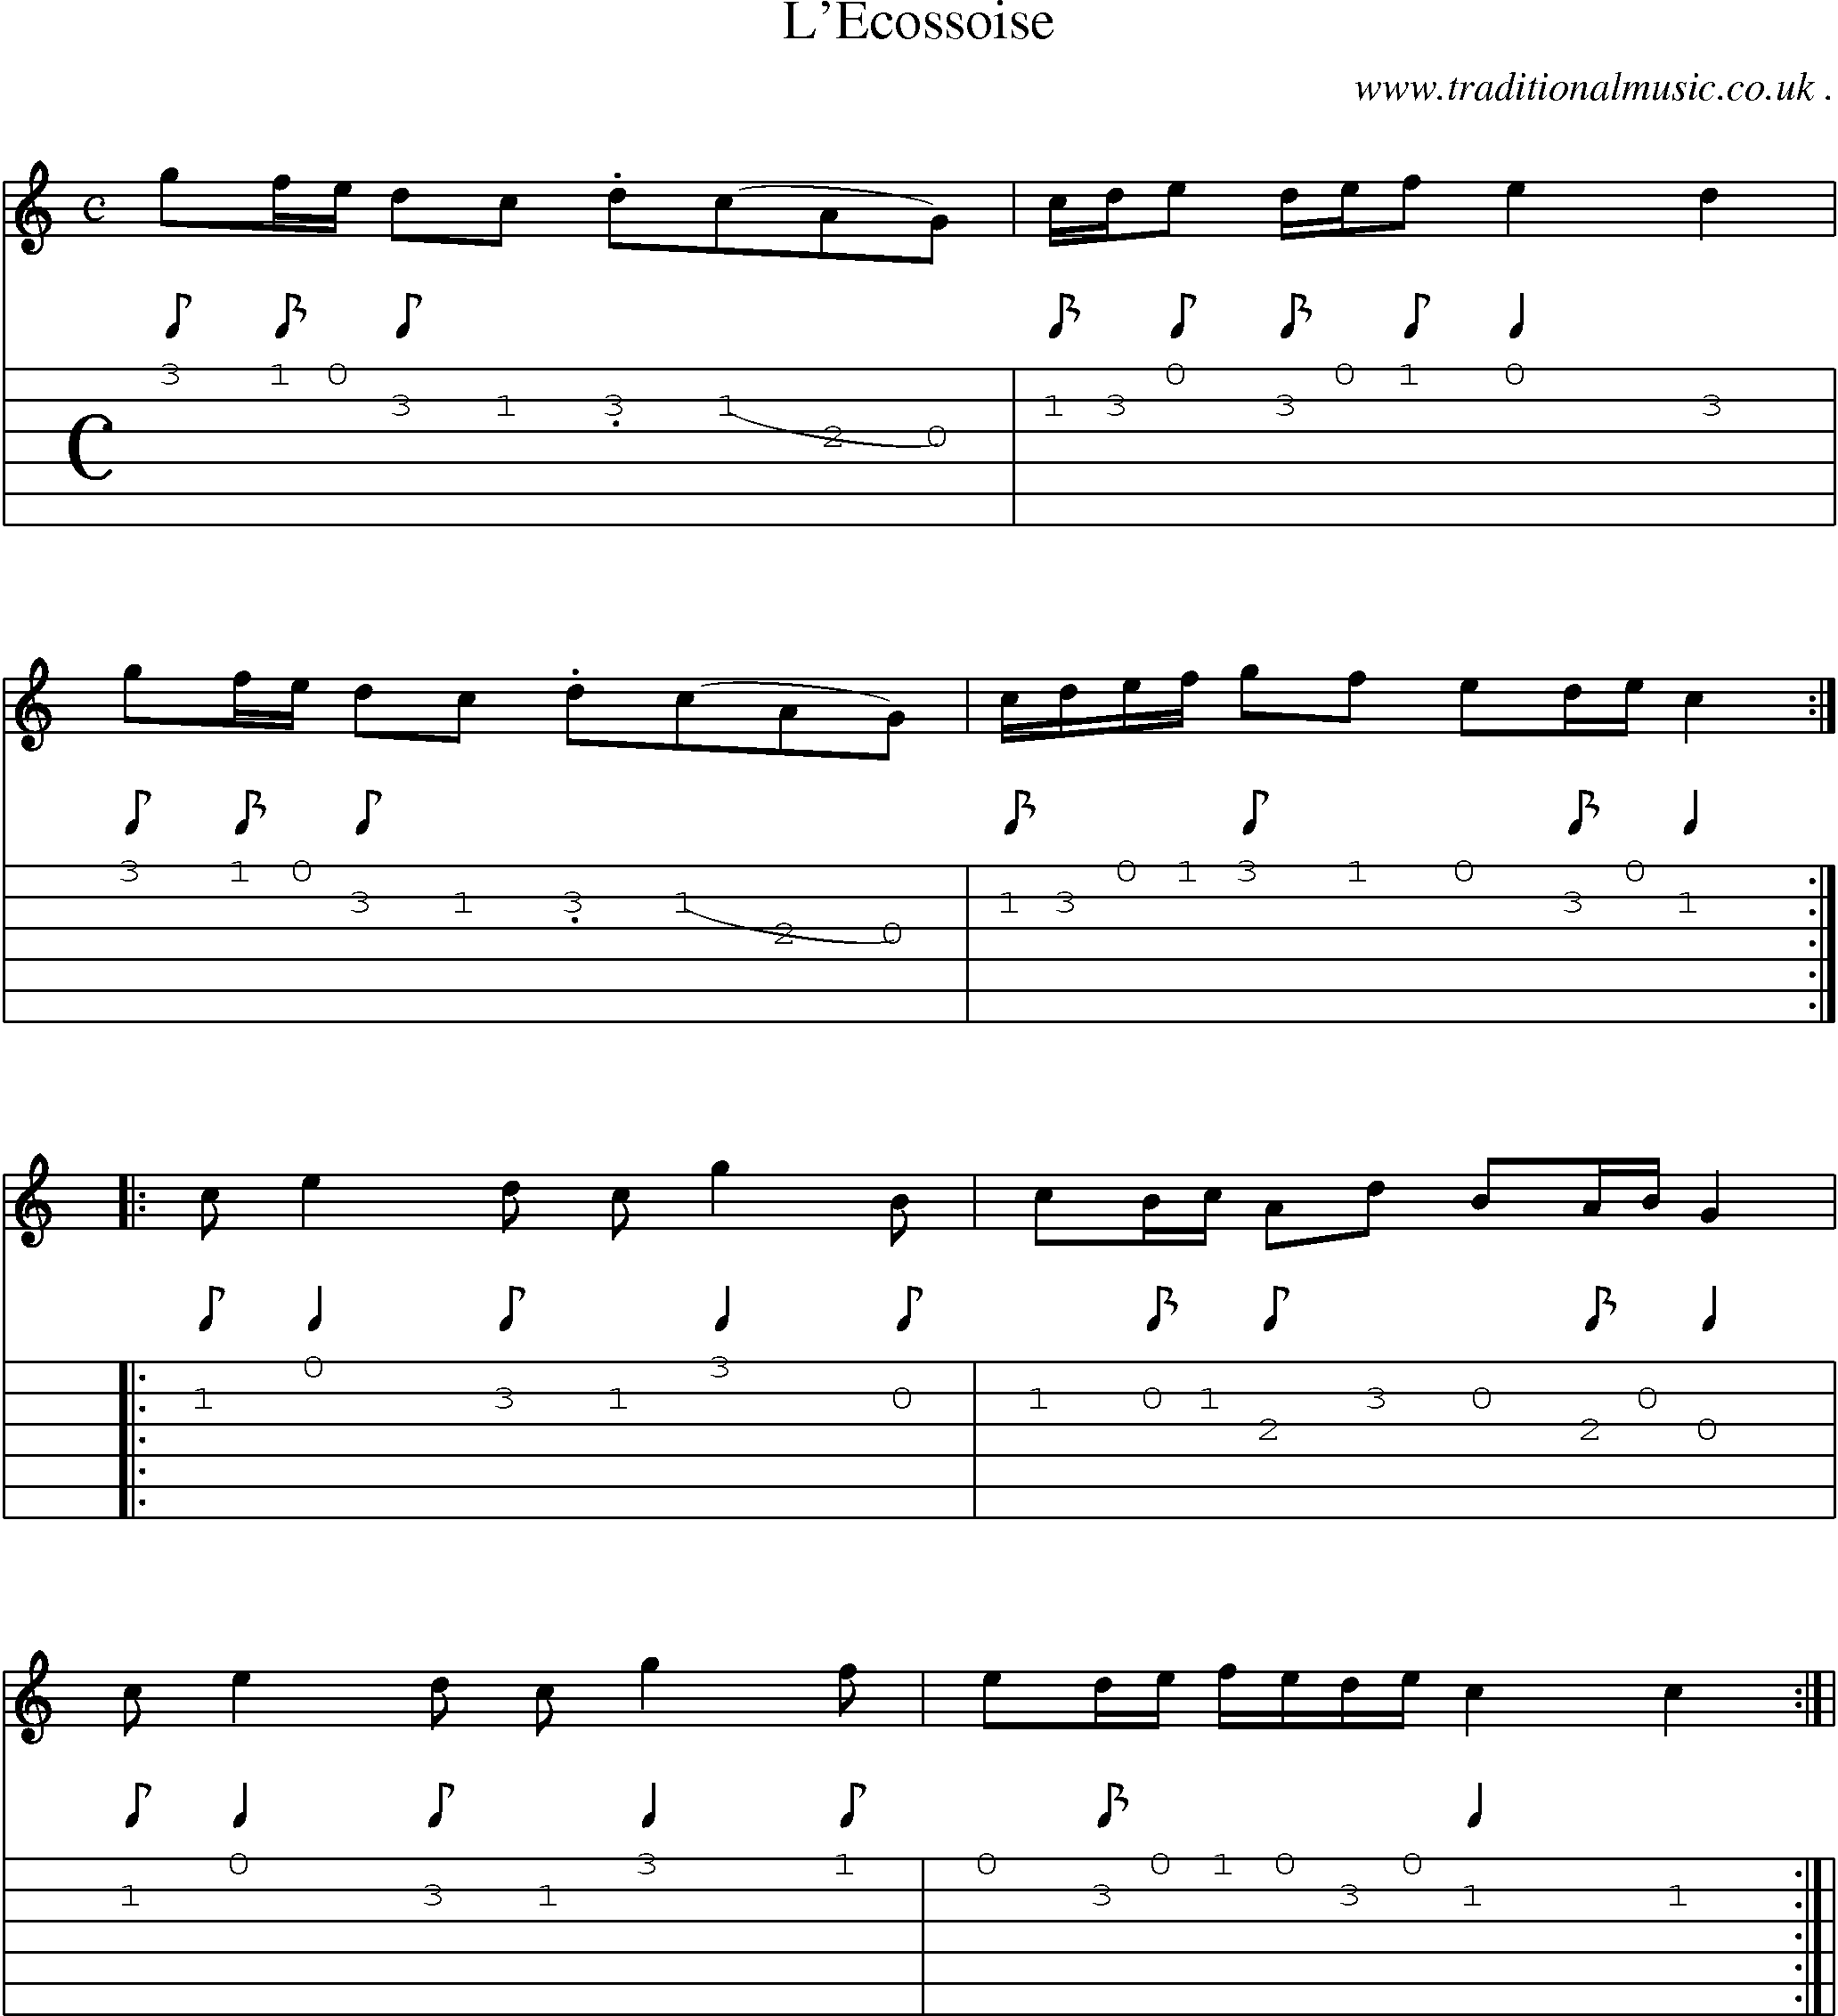 Sheet-Music and Guitar Tabs for Lecossoise